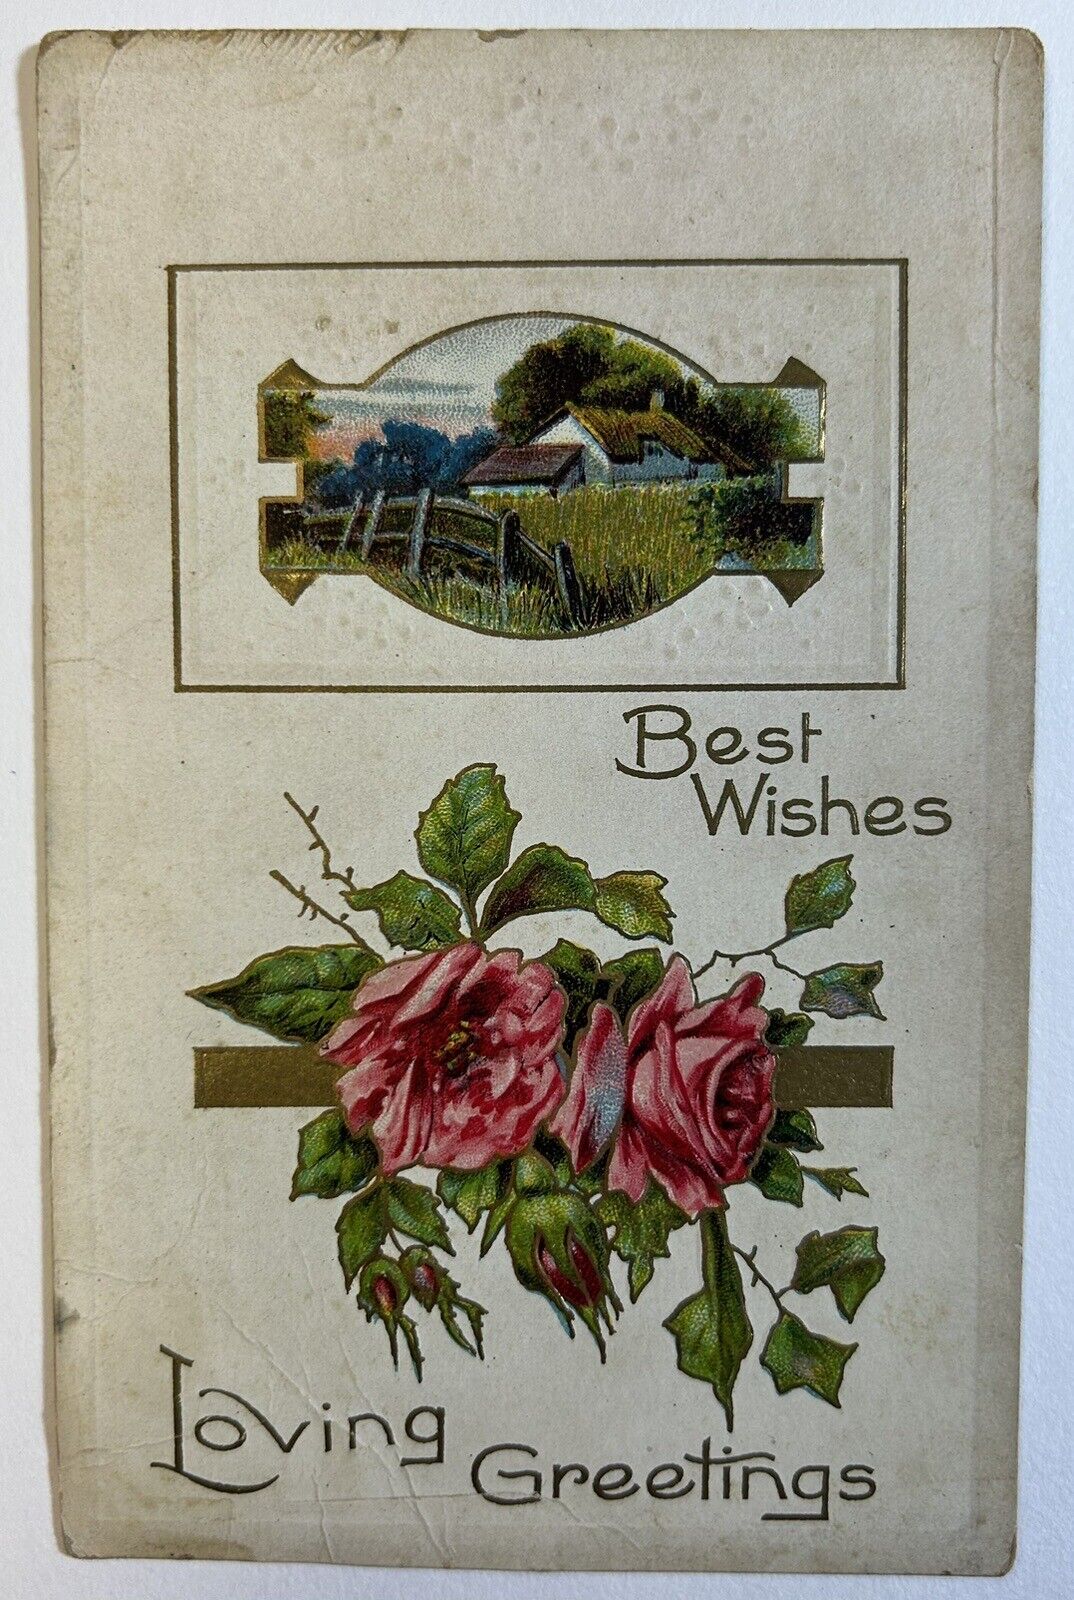 Best Wishes Loving Greetings Antique Embossed Floral Postcard, Posted Argos, IN 